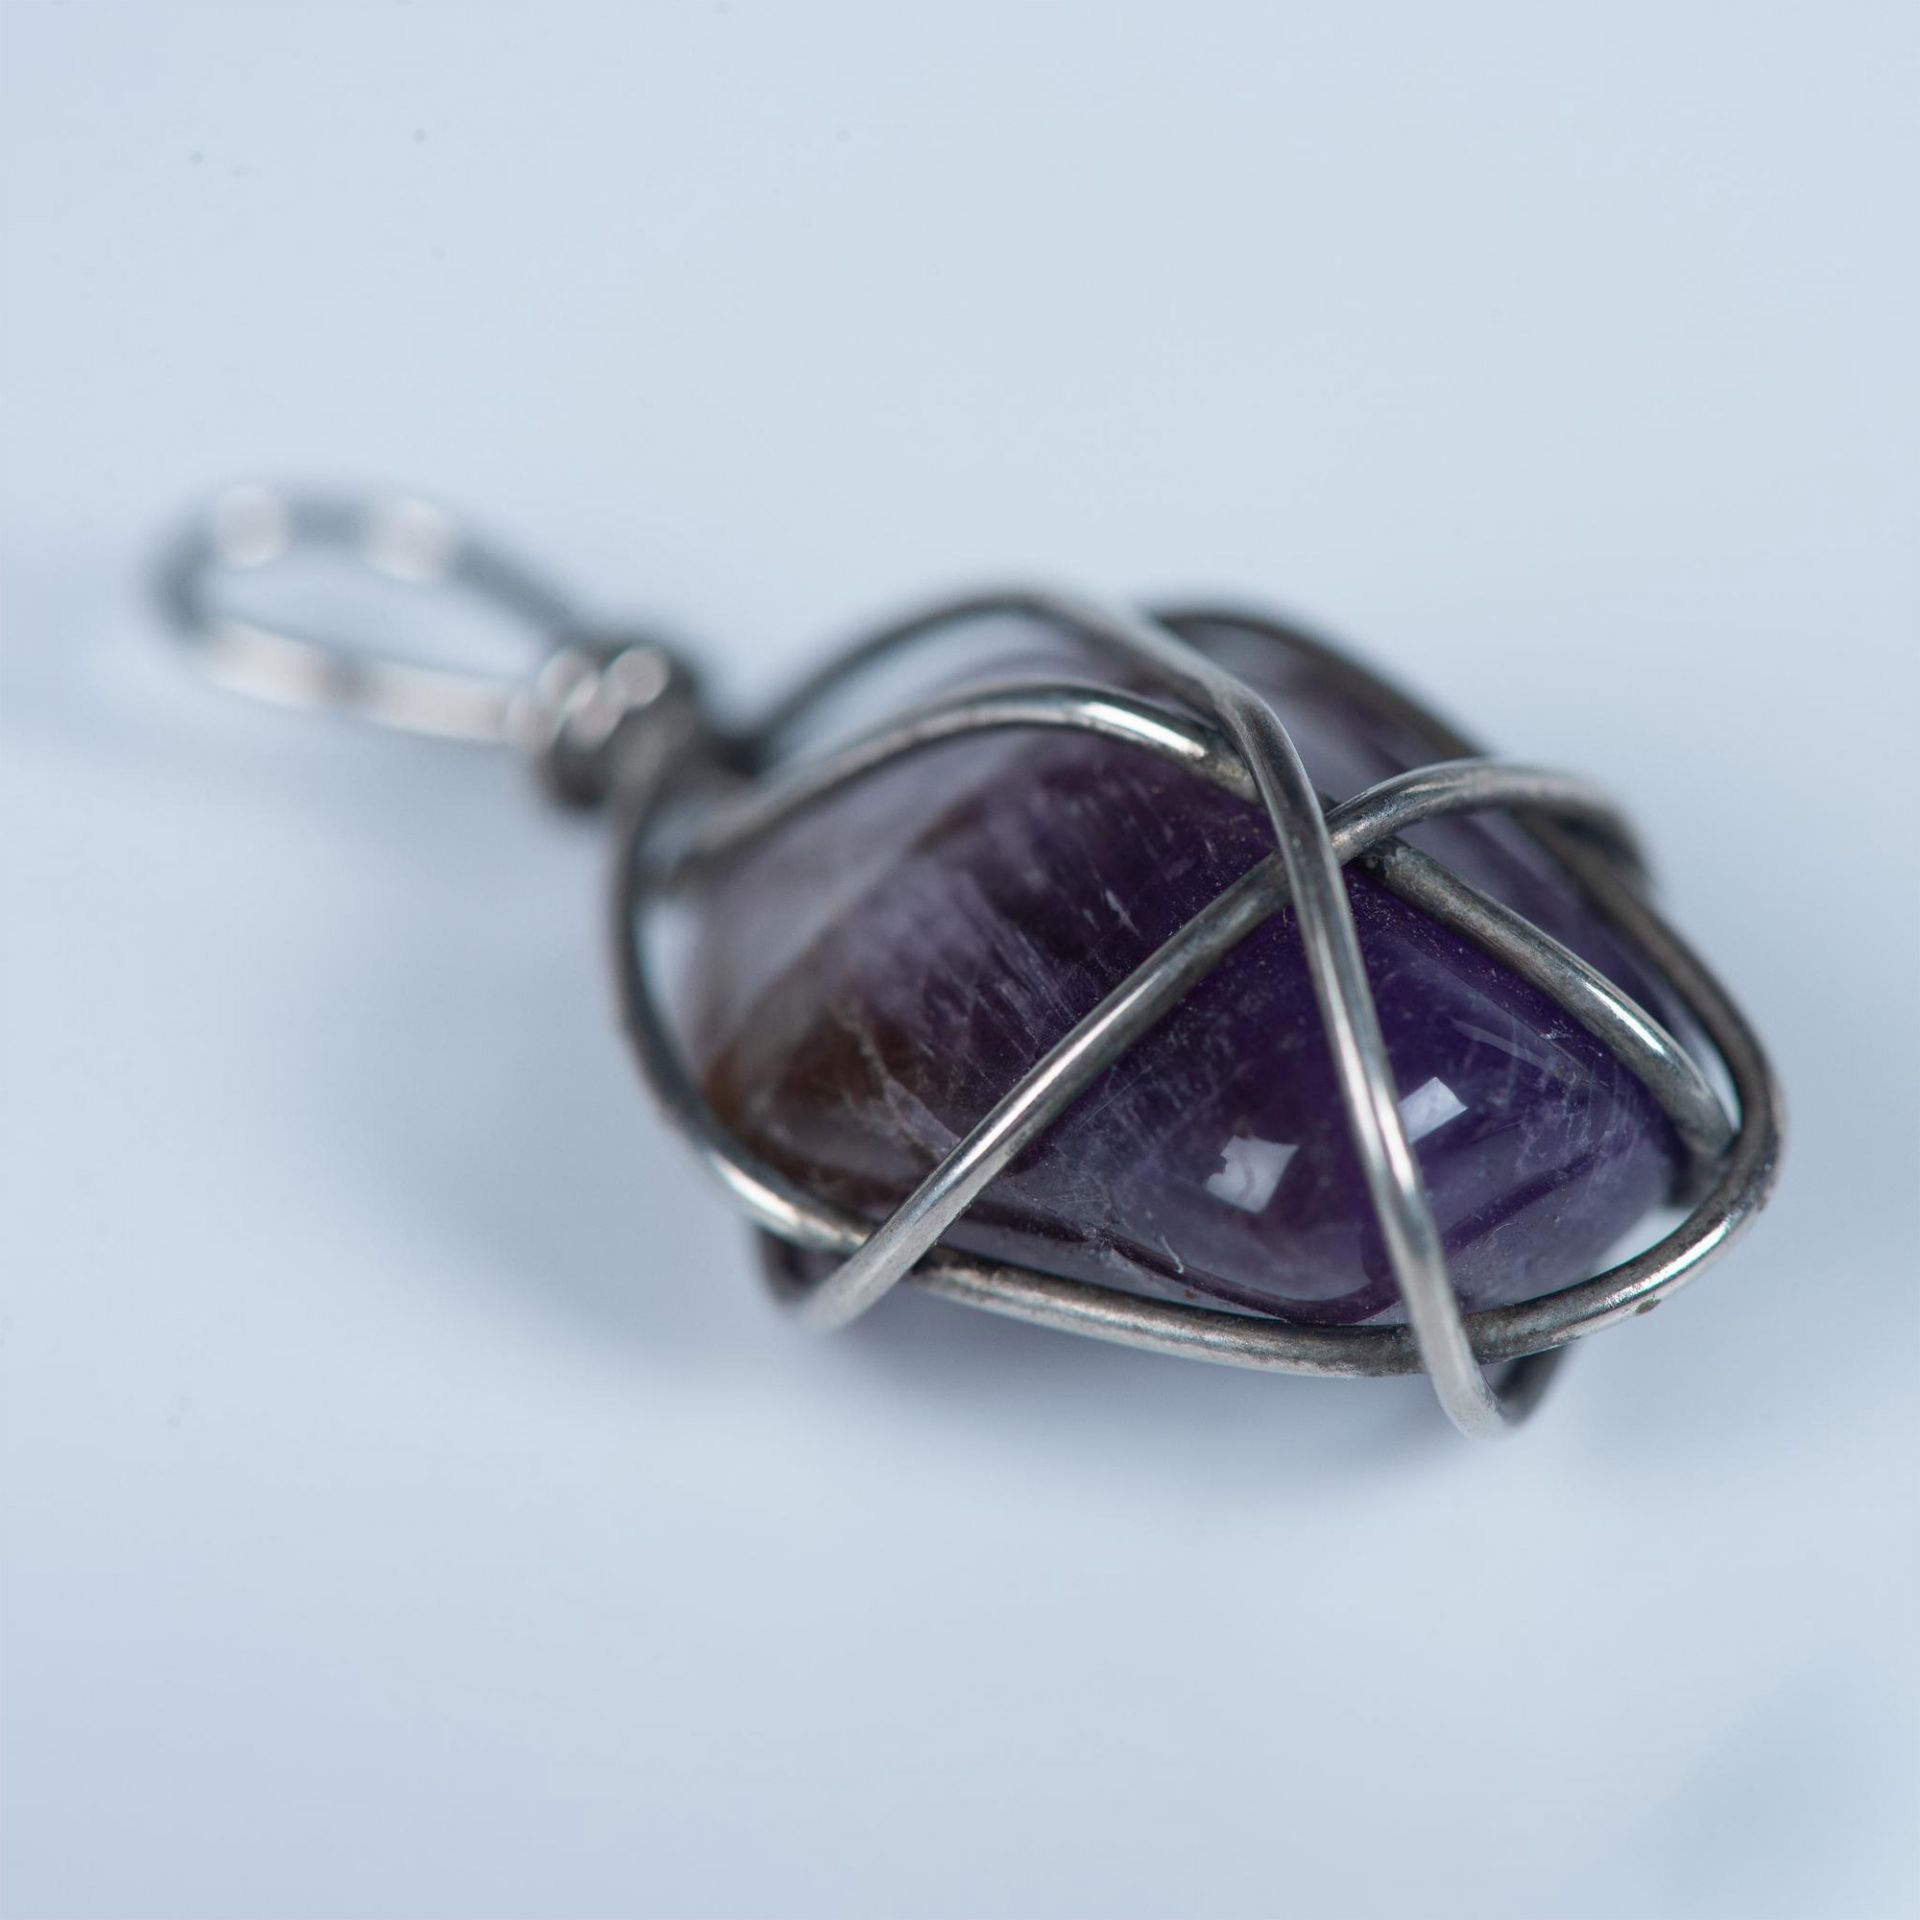 Handmade Wire-Wrapped Amethyst Pendant - Image 4 of 4